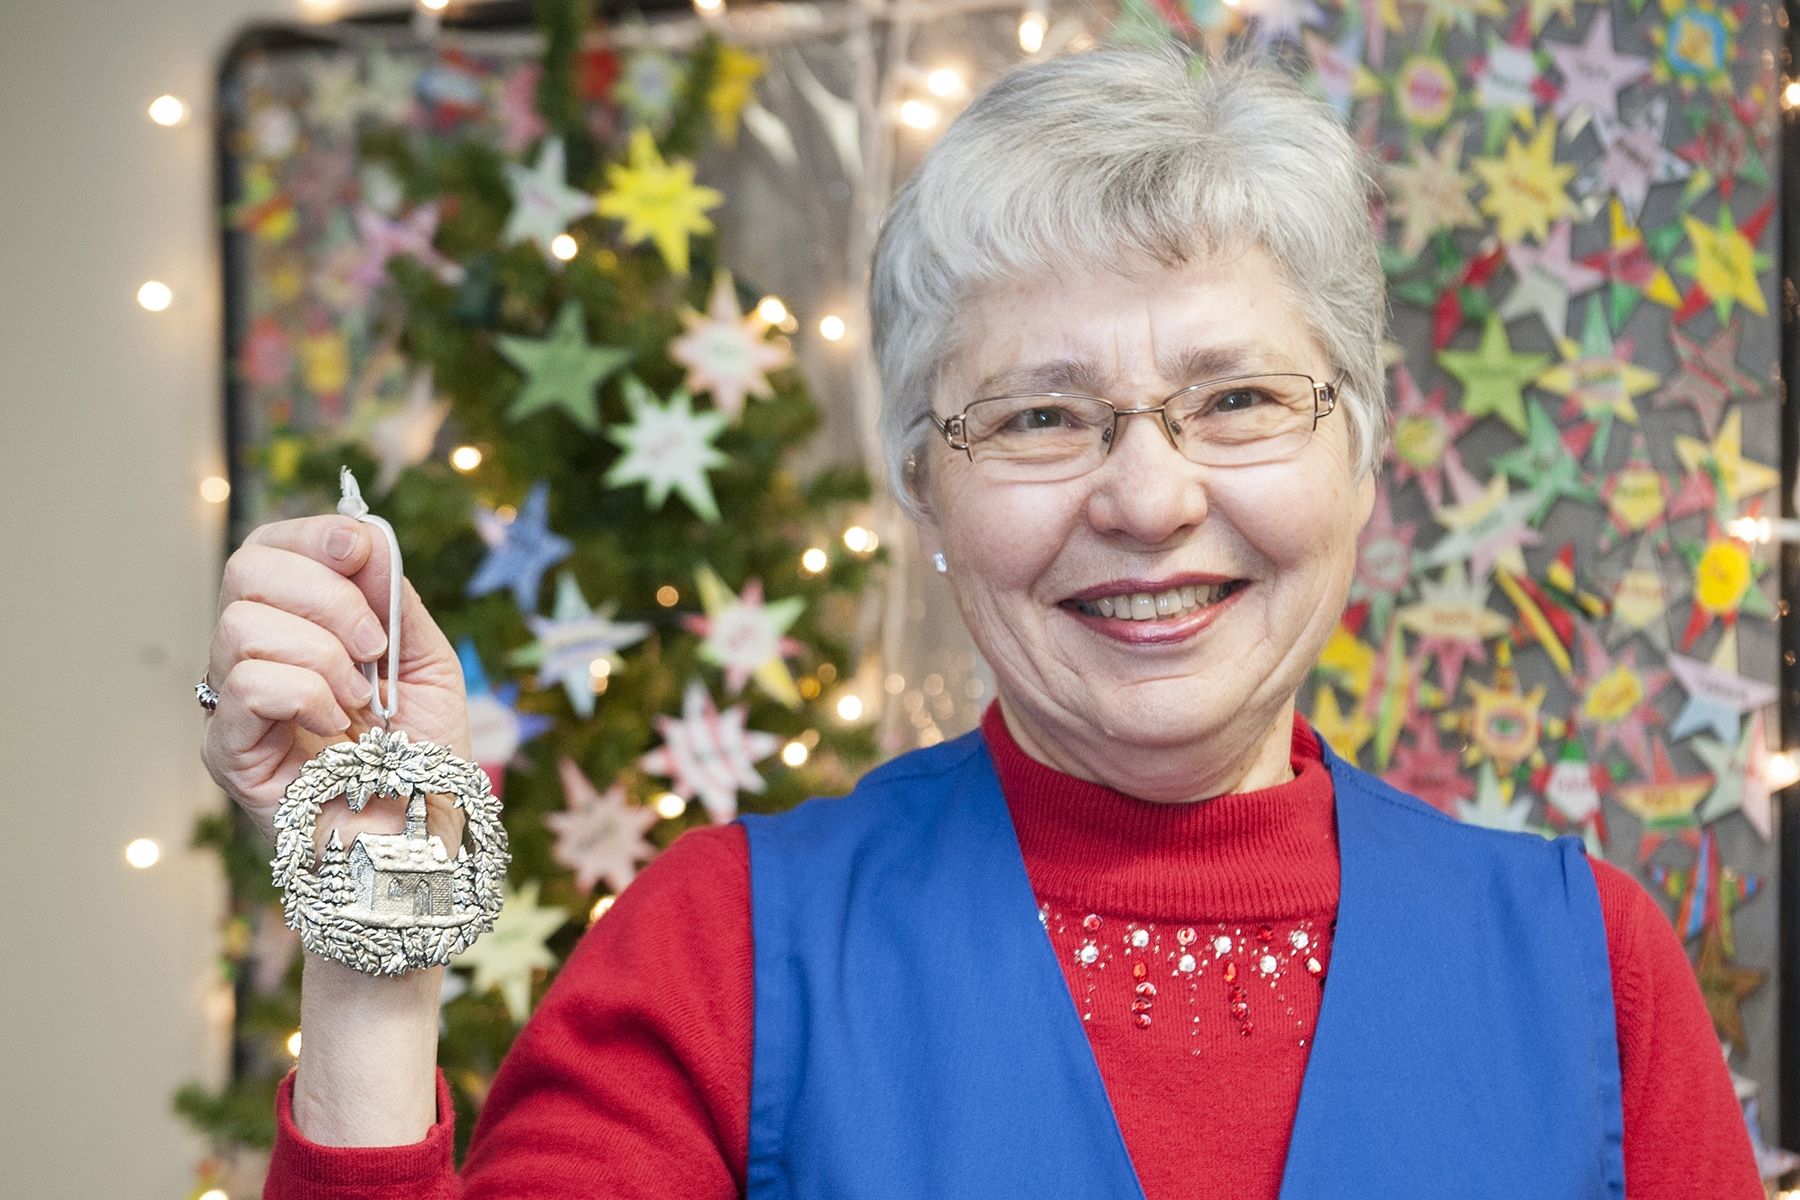 Merna Manders, co-convenor of the Auxiliary's Patient Comforts Committee, shows off the ornament that will be given out to patients this Christmas Eve.